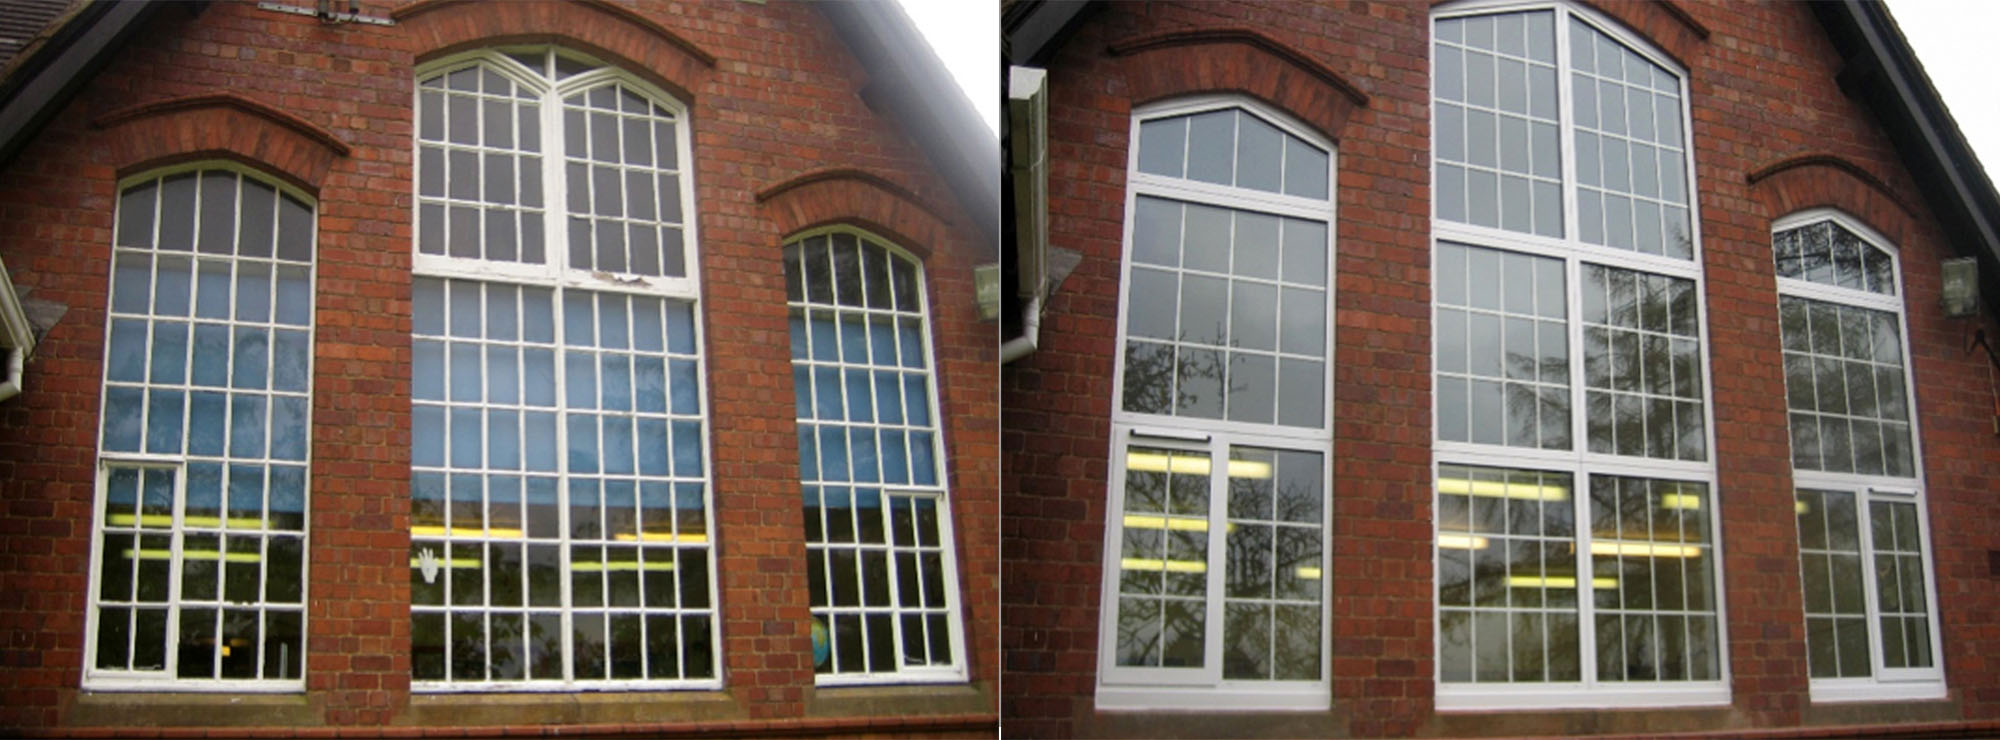 <strong>Church of England Primary School in Worcestershire.</strong>Replacement steel windows and timber doors with white commercial aluminium.